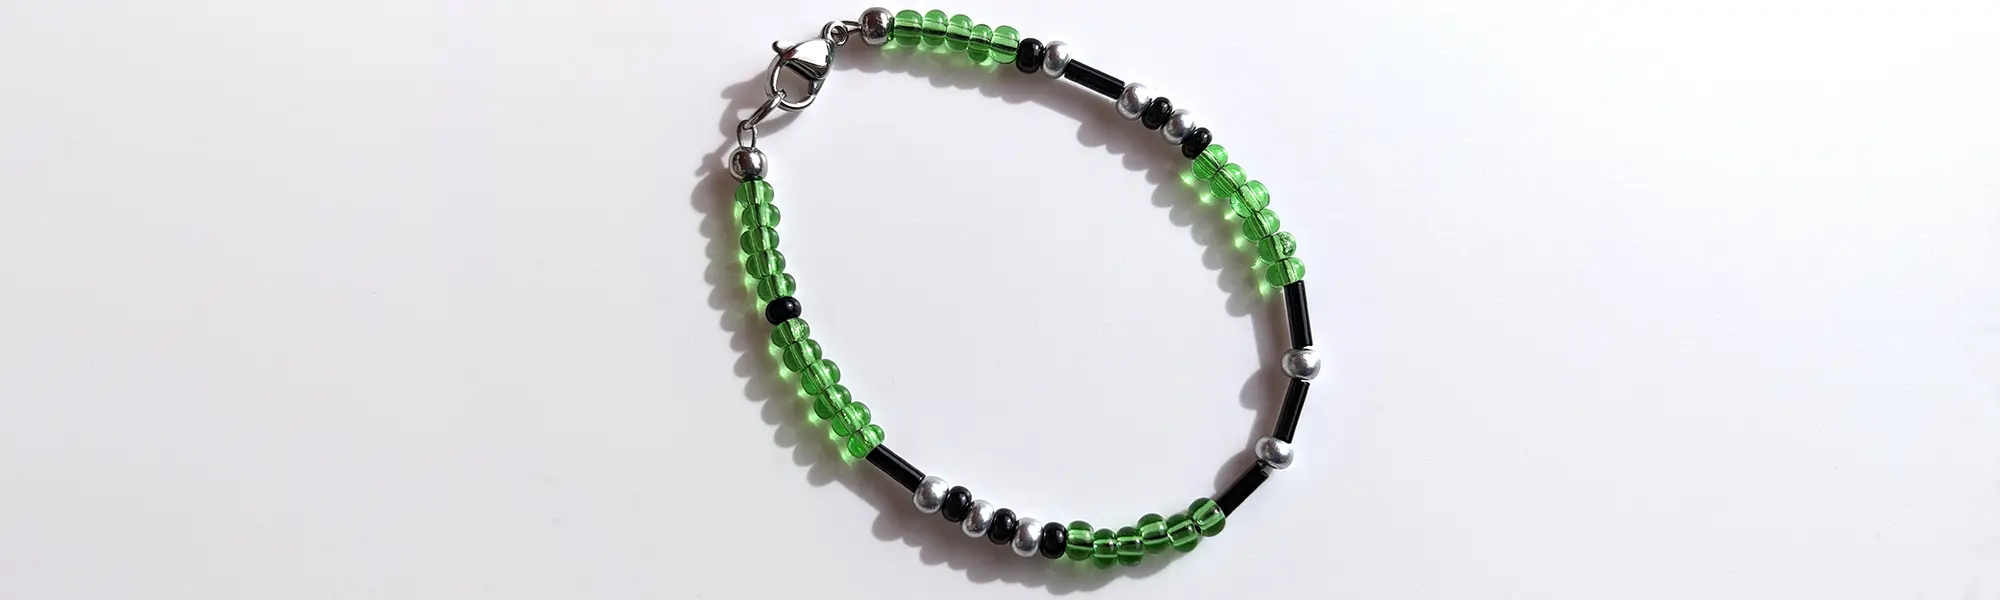 Tranquil Limeade Shimmer Morse code bracelet, handcrafted with lush, calming green & silver Czech glass beads, holds the secret message “Love.”